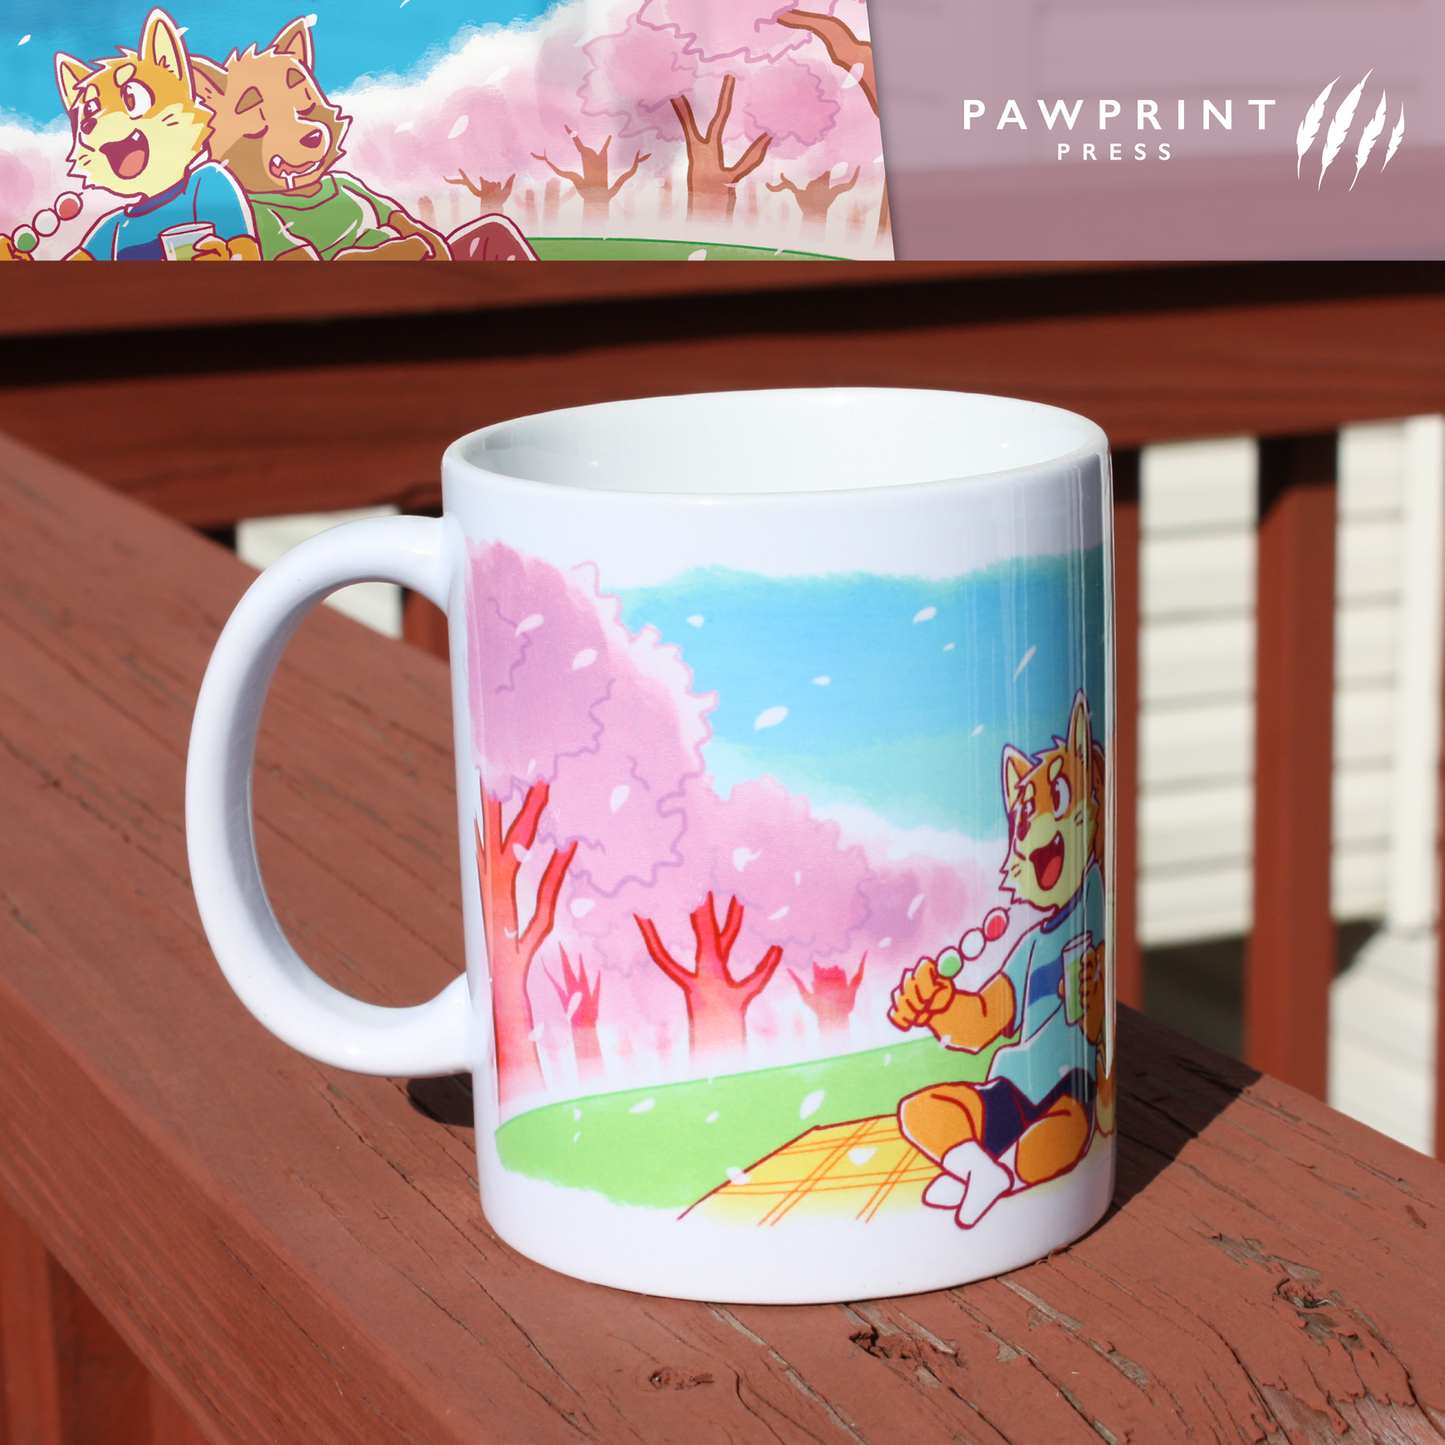 Snow, Moon, and Flowers Mugs: Flowers